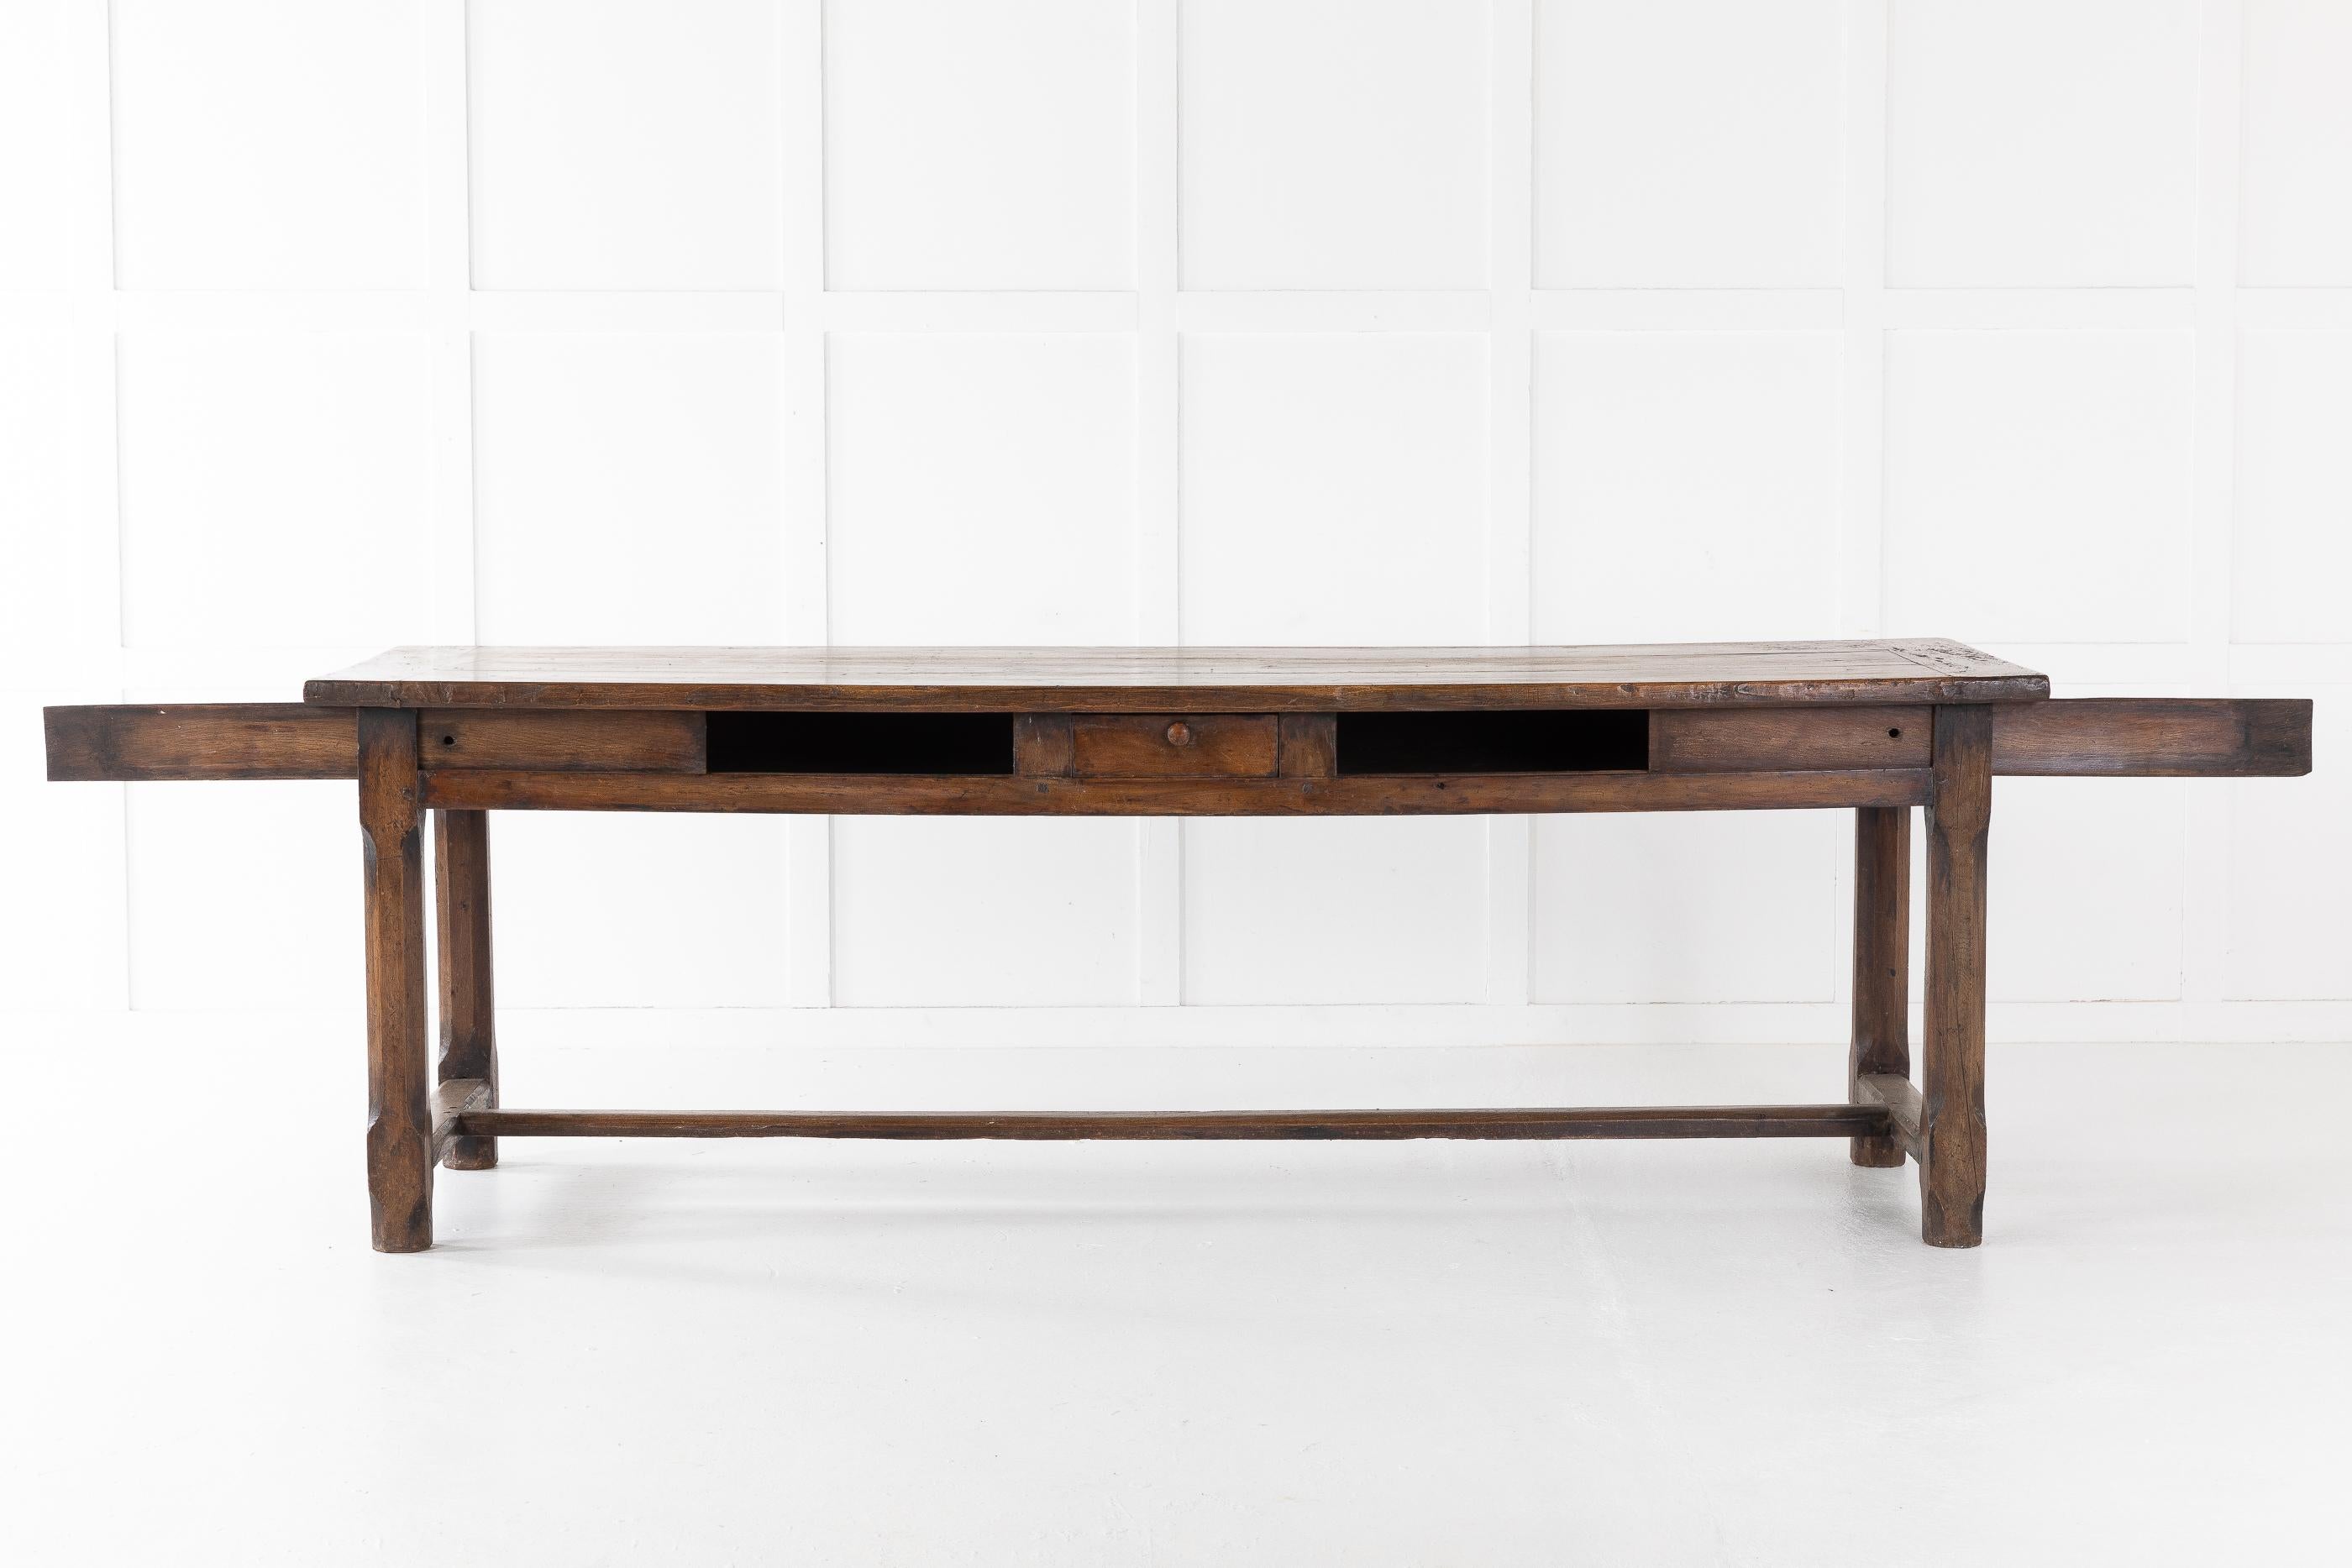 18th century French farm table in walnut of very nice color. The top is of three planks above two sliding panel drawers and one-center drawer.

Four posts support the sturdy table, fixed with a Classic 